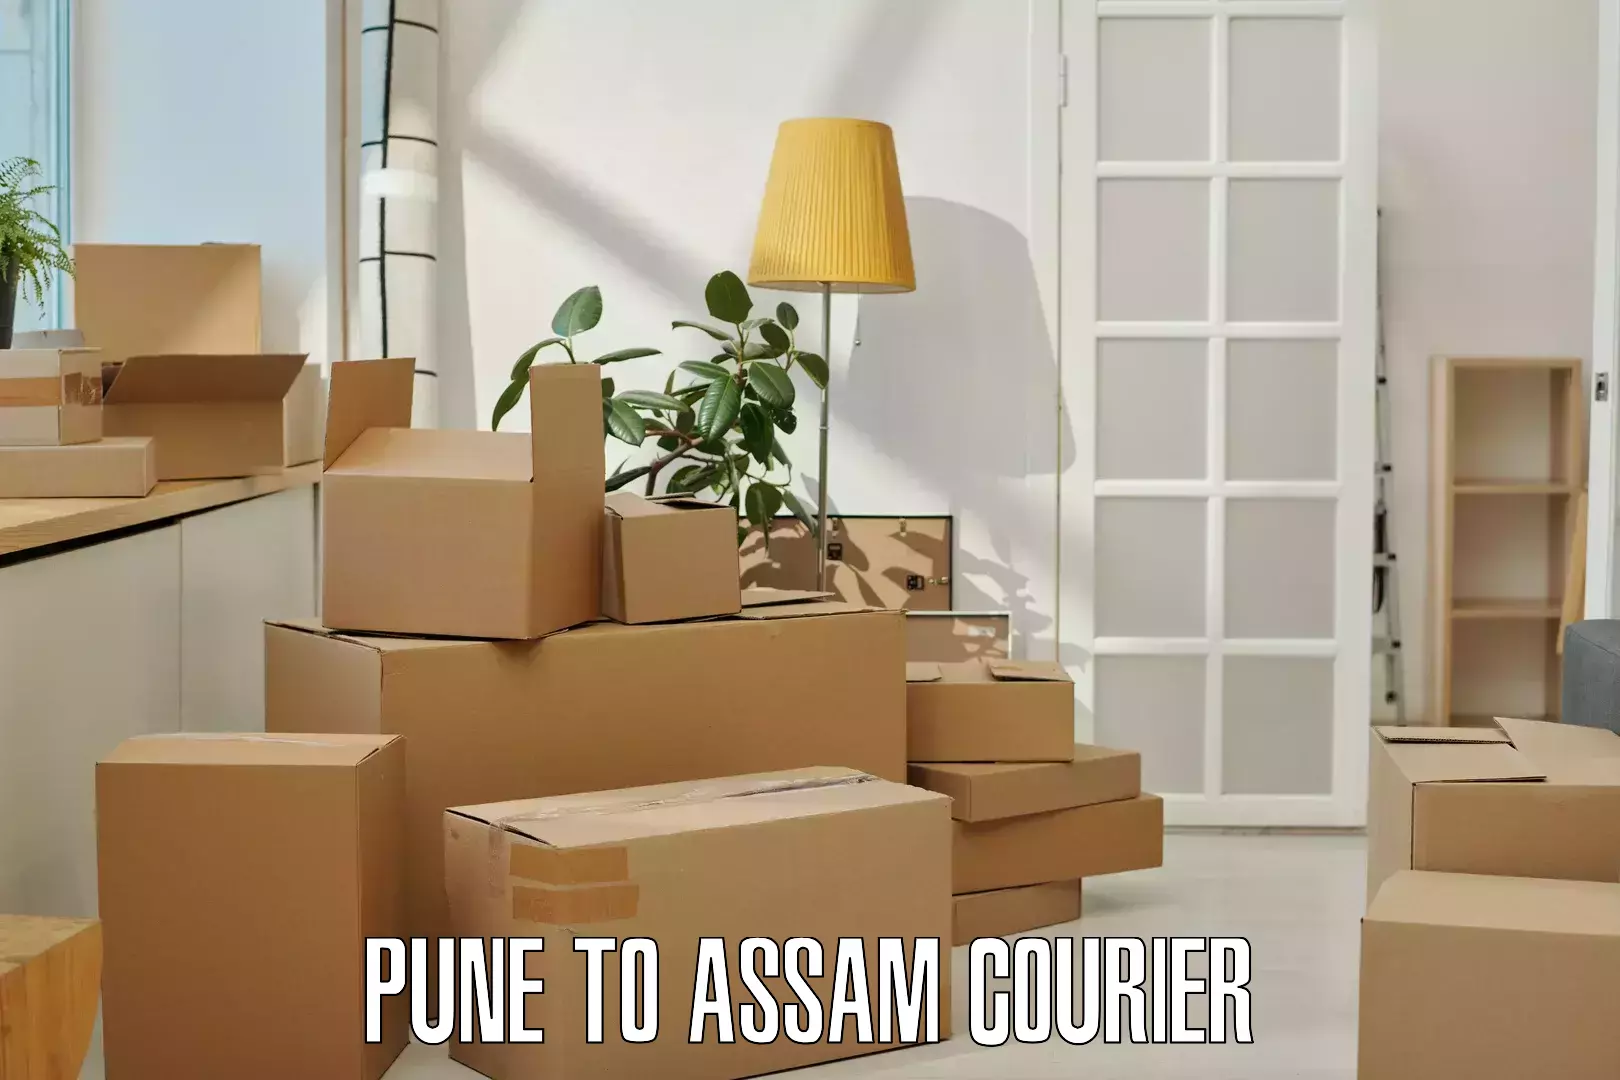 24-hour courier service Pune to Assam